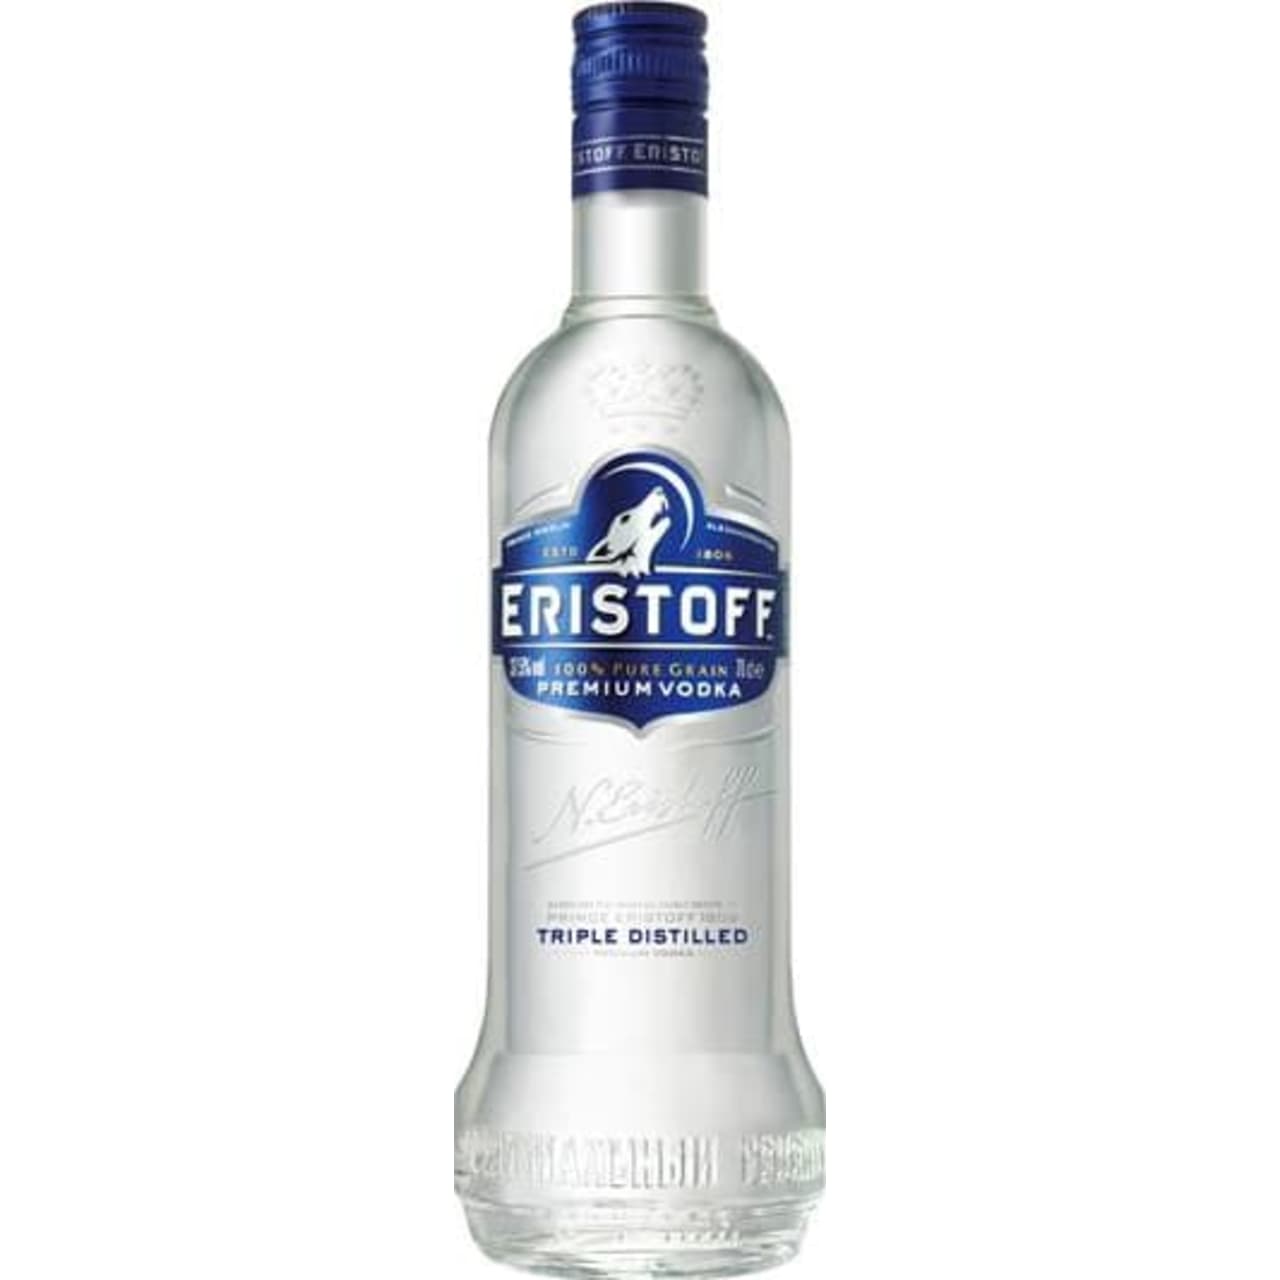 Made from 100% pure grain, which contains just the right level of moisture and pure character, and demineralised water, Eristoff is triple distilled and finally charcoal filtered to ensure absolute purity, to create a clean and crisp taste.